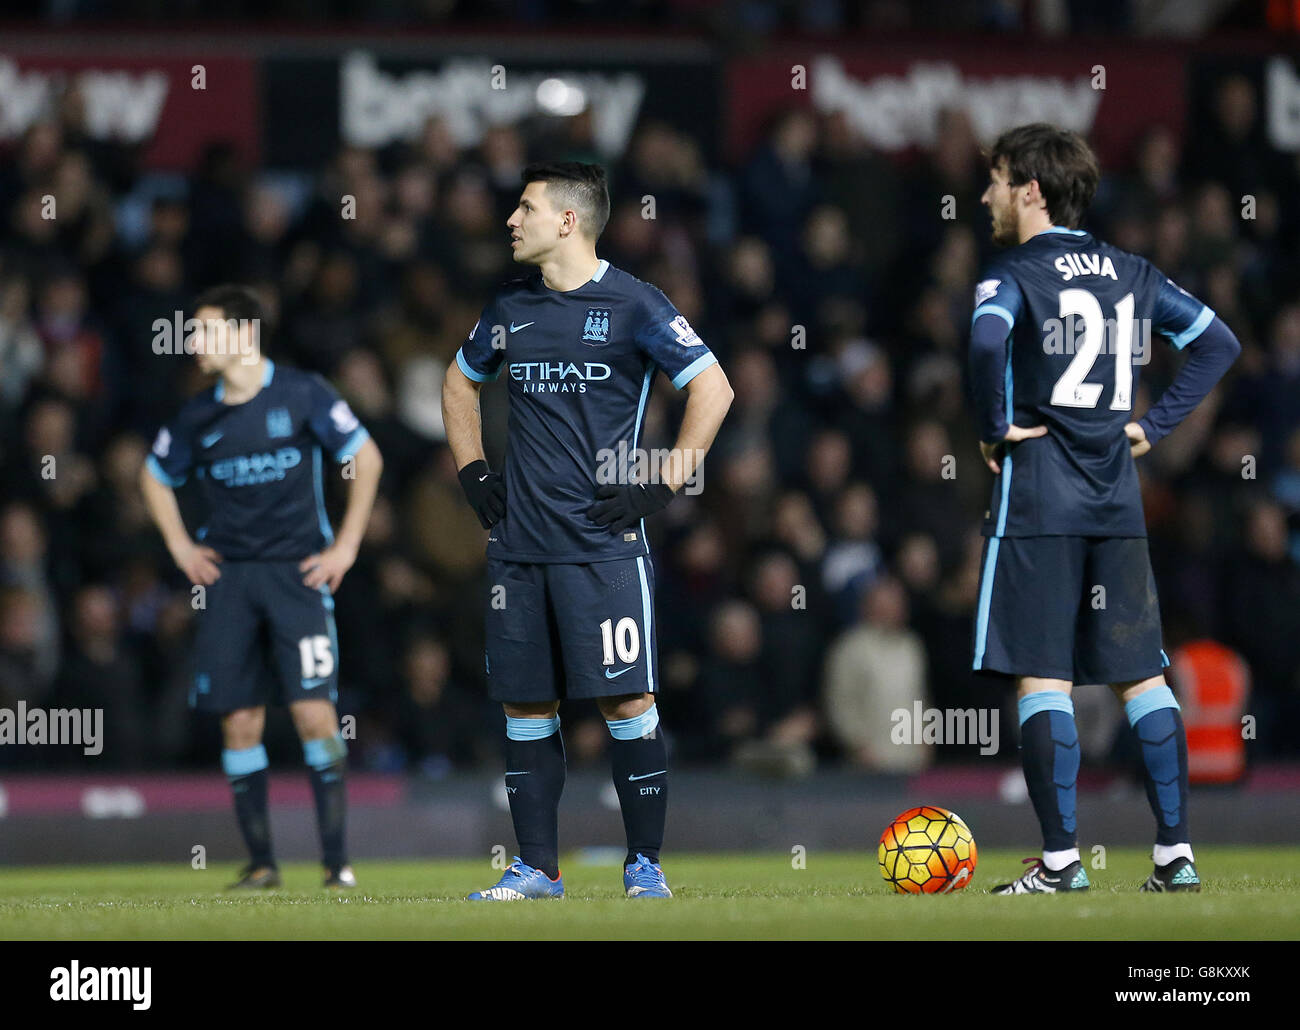 Manchester City's Sergio Aguero and David Silva react after West Ham United's Enner Valencia scores his side's second goal of the game during the Barclays Premier League match at Upton Park, London. Stock Photo